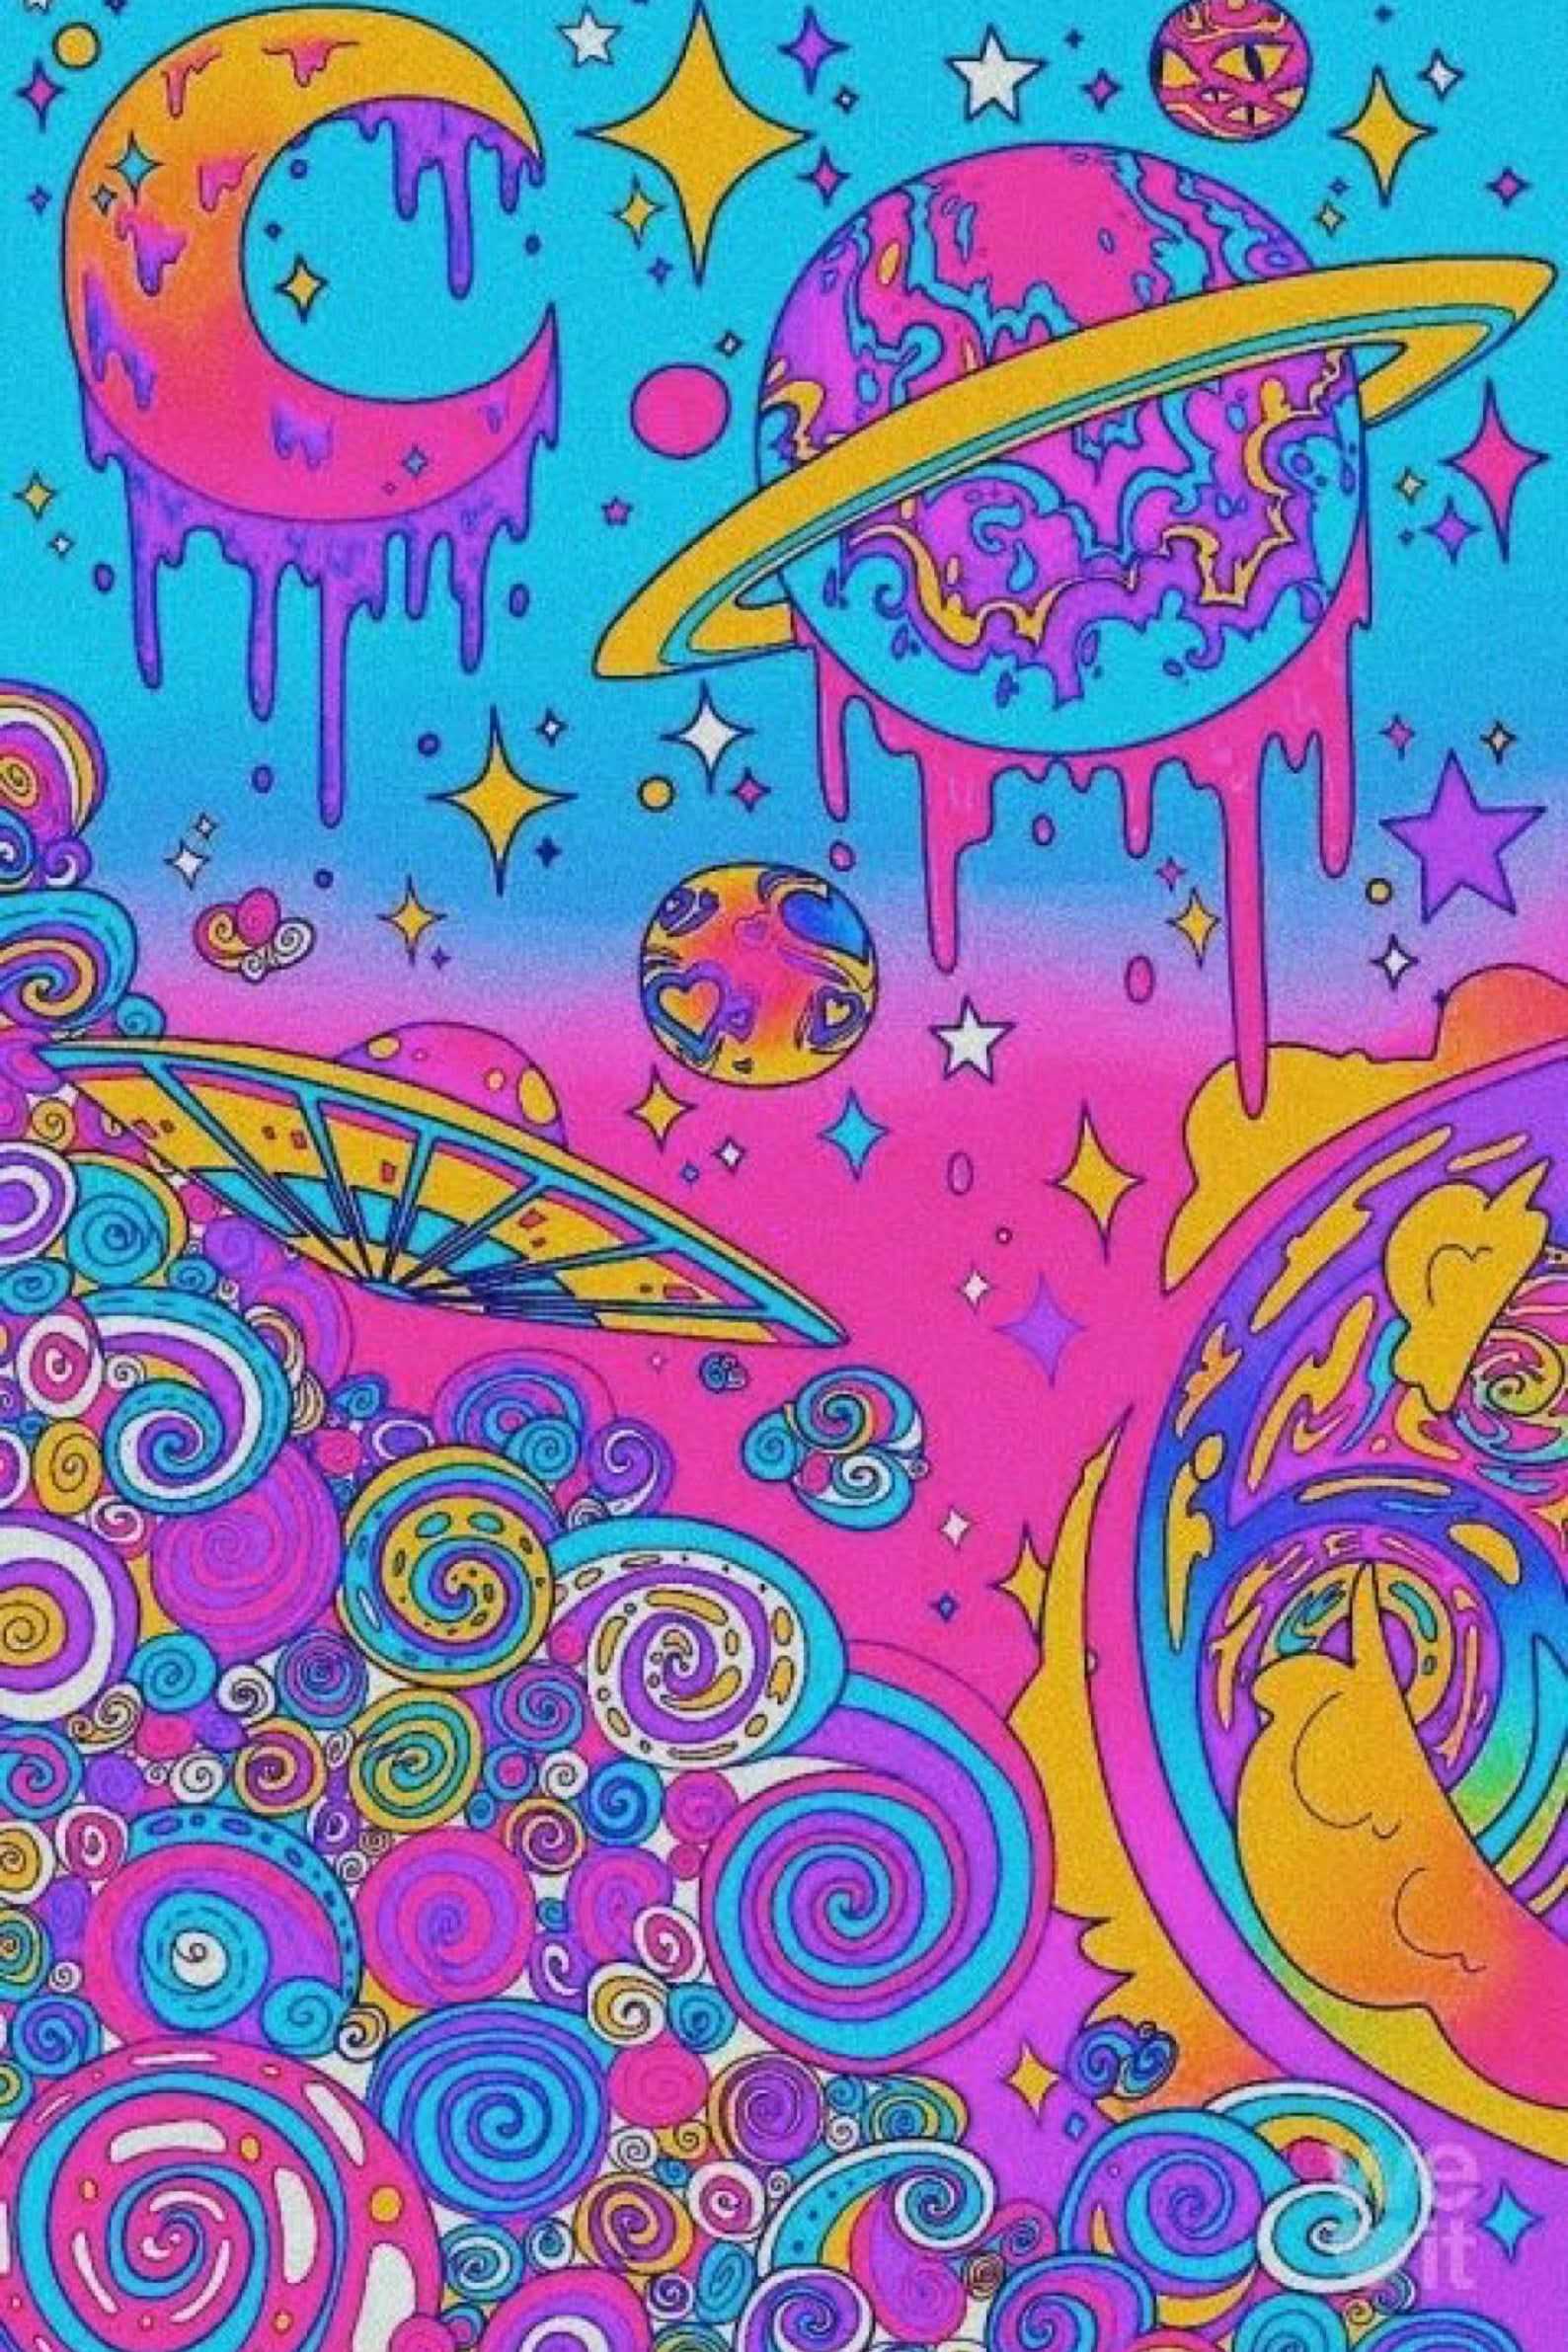 moving psychedelic wallpapers